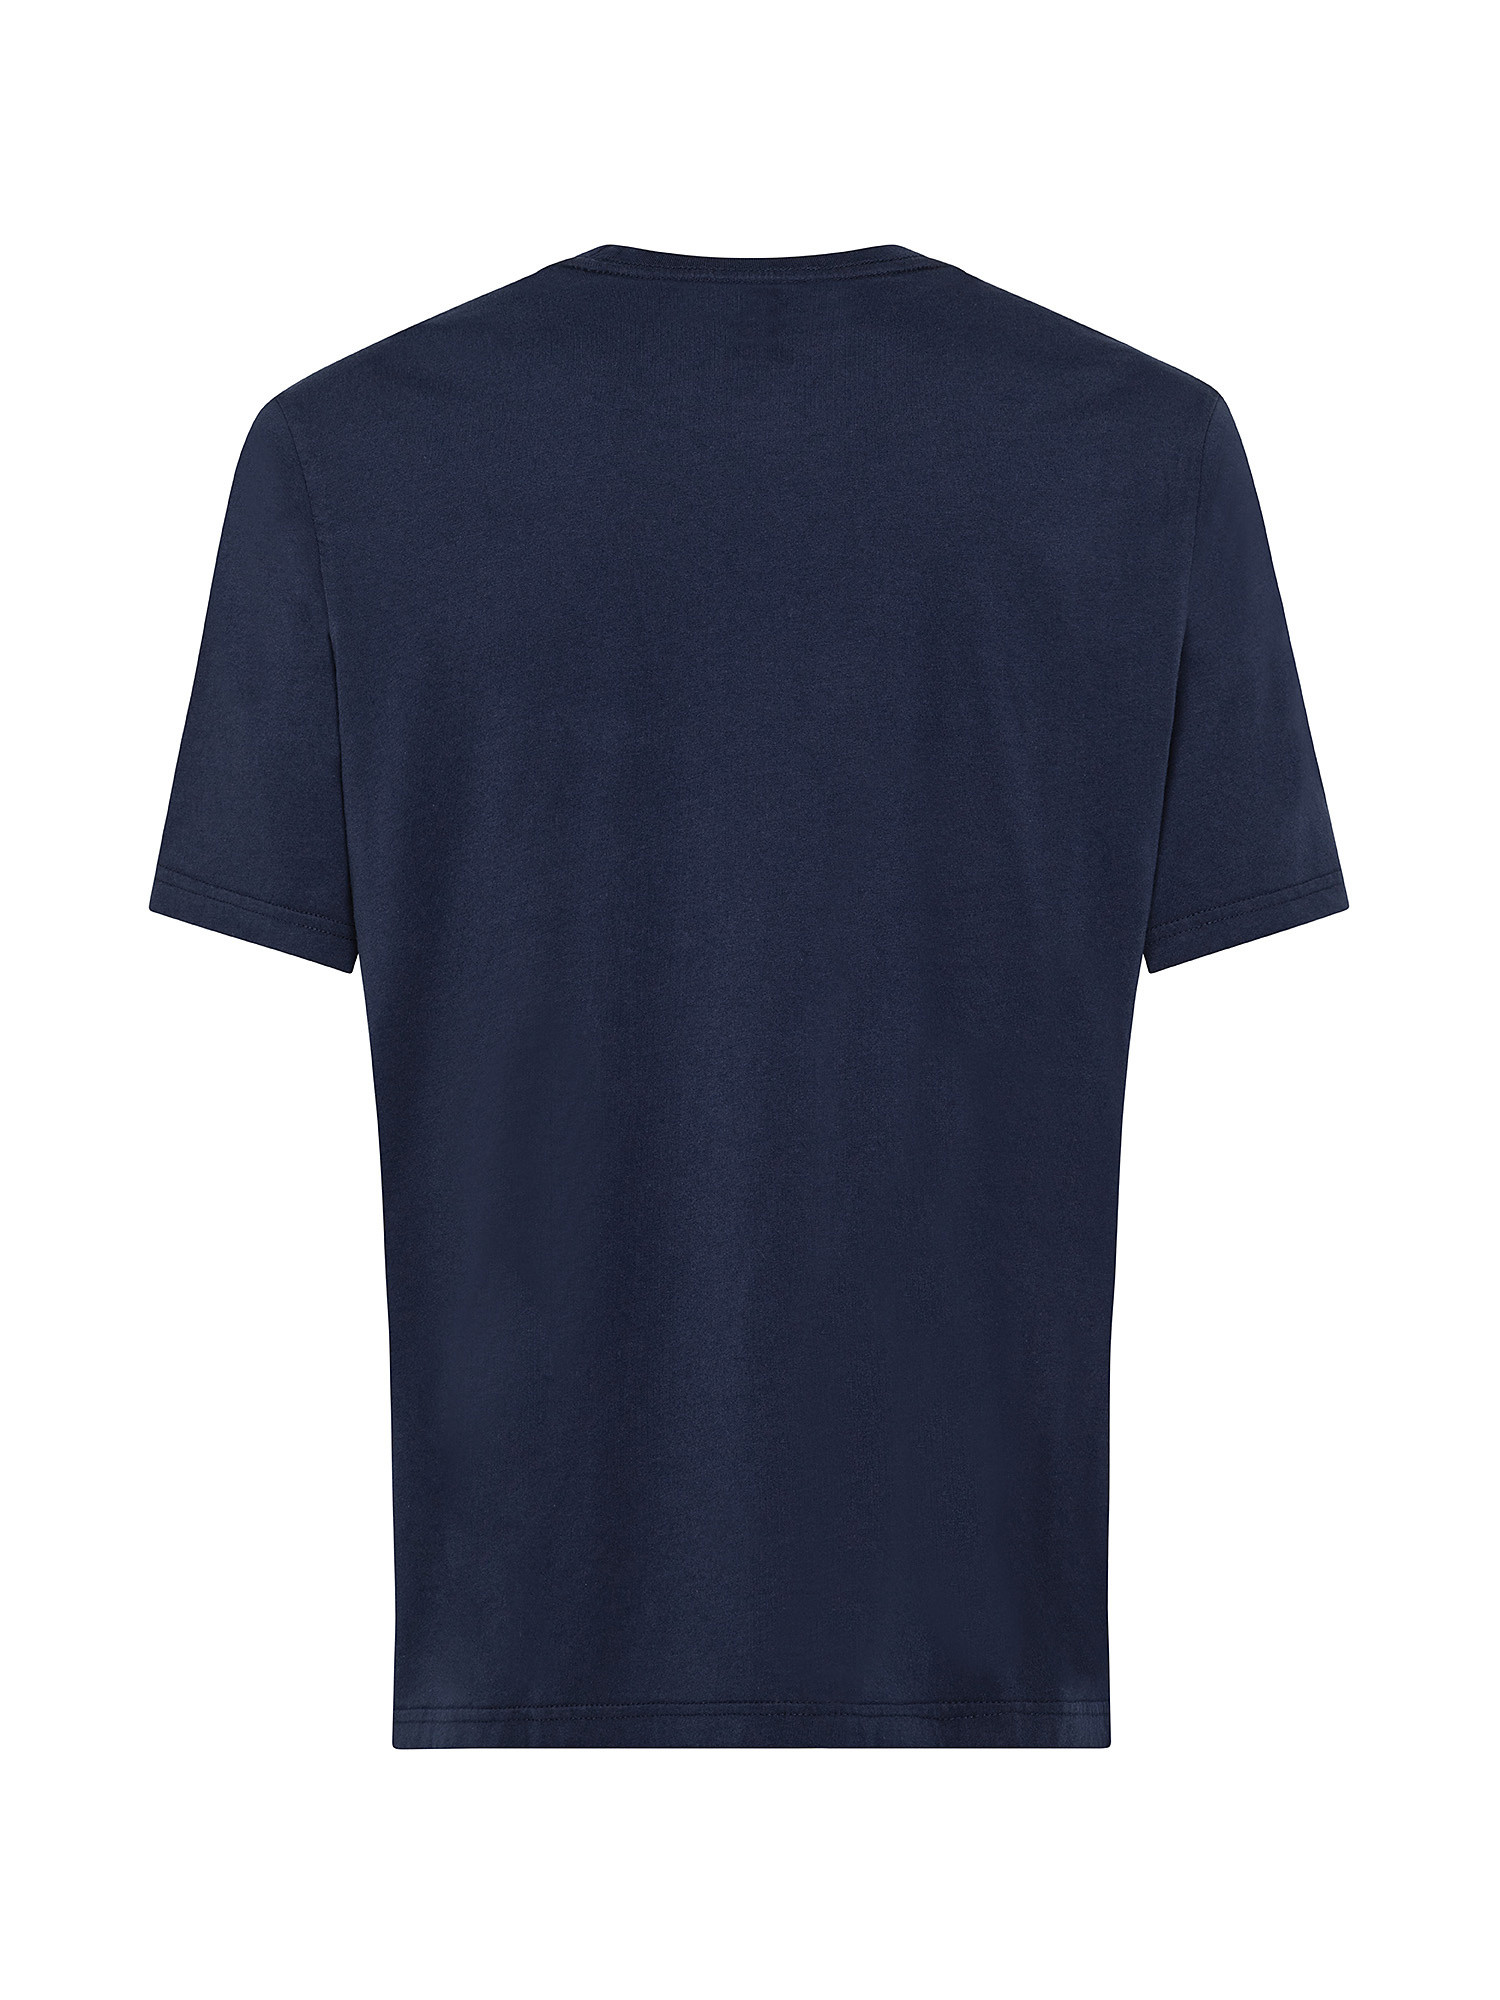 T-shirt with logo, Blue, large image number 1